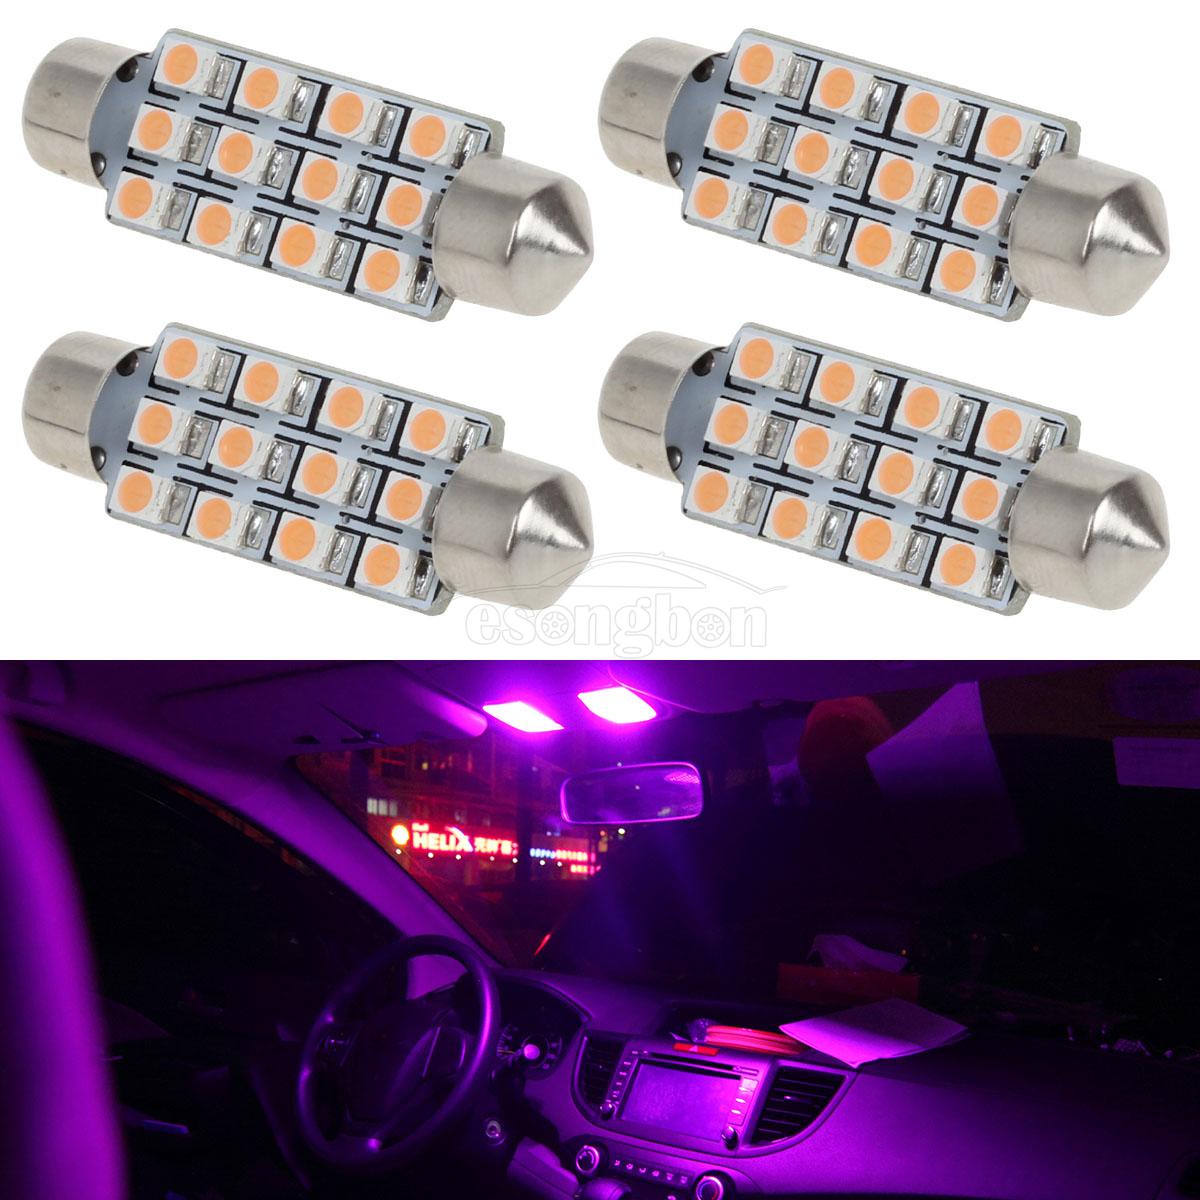 Details About 4x Pink Purple Led Bulbs 42mm Festoon 12smd For Car Interior Dome Map Lights 12v